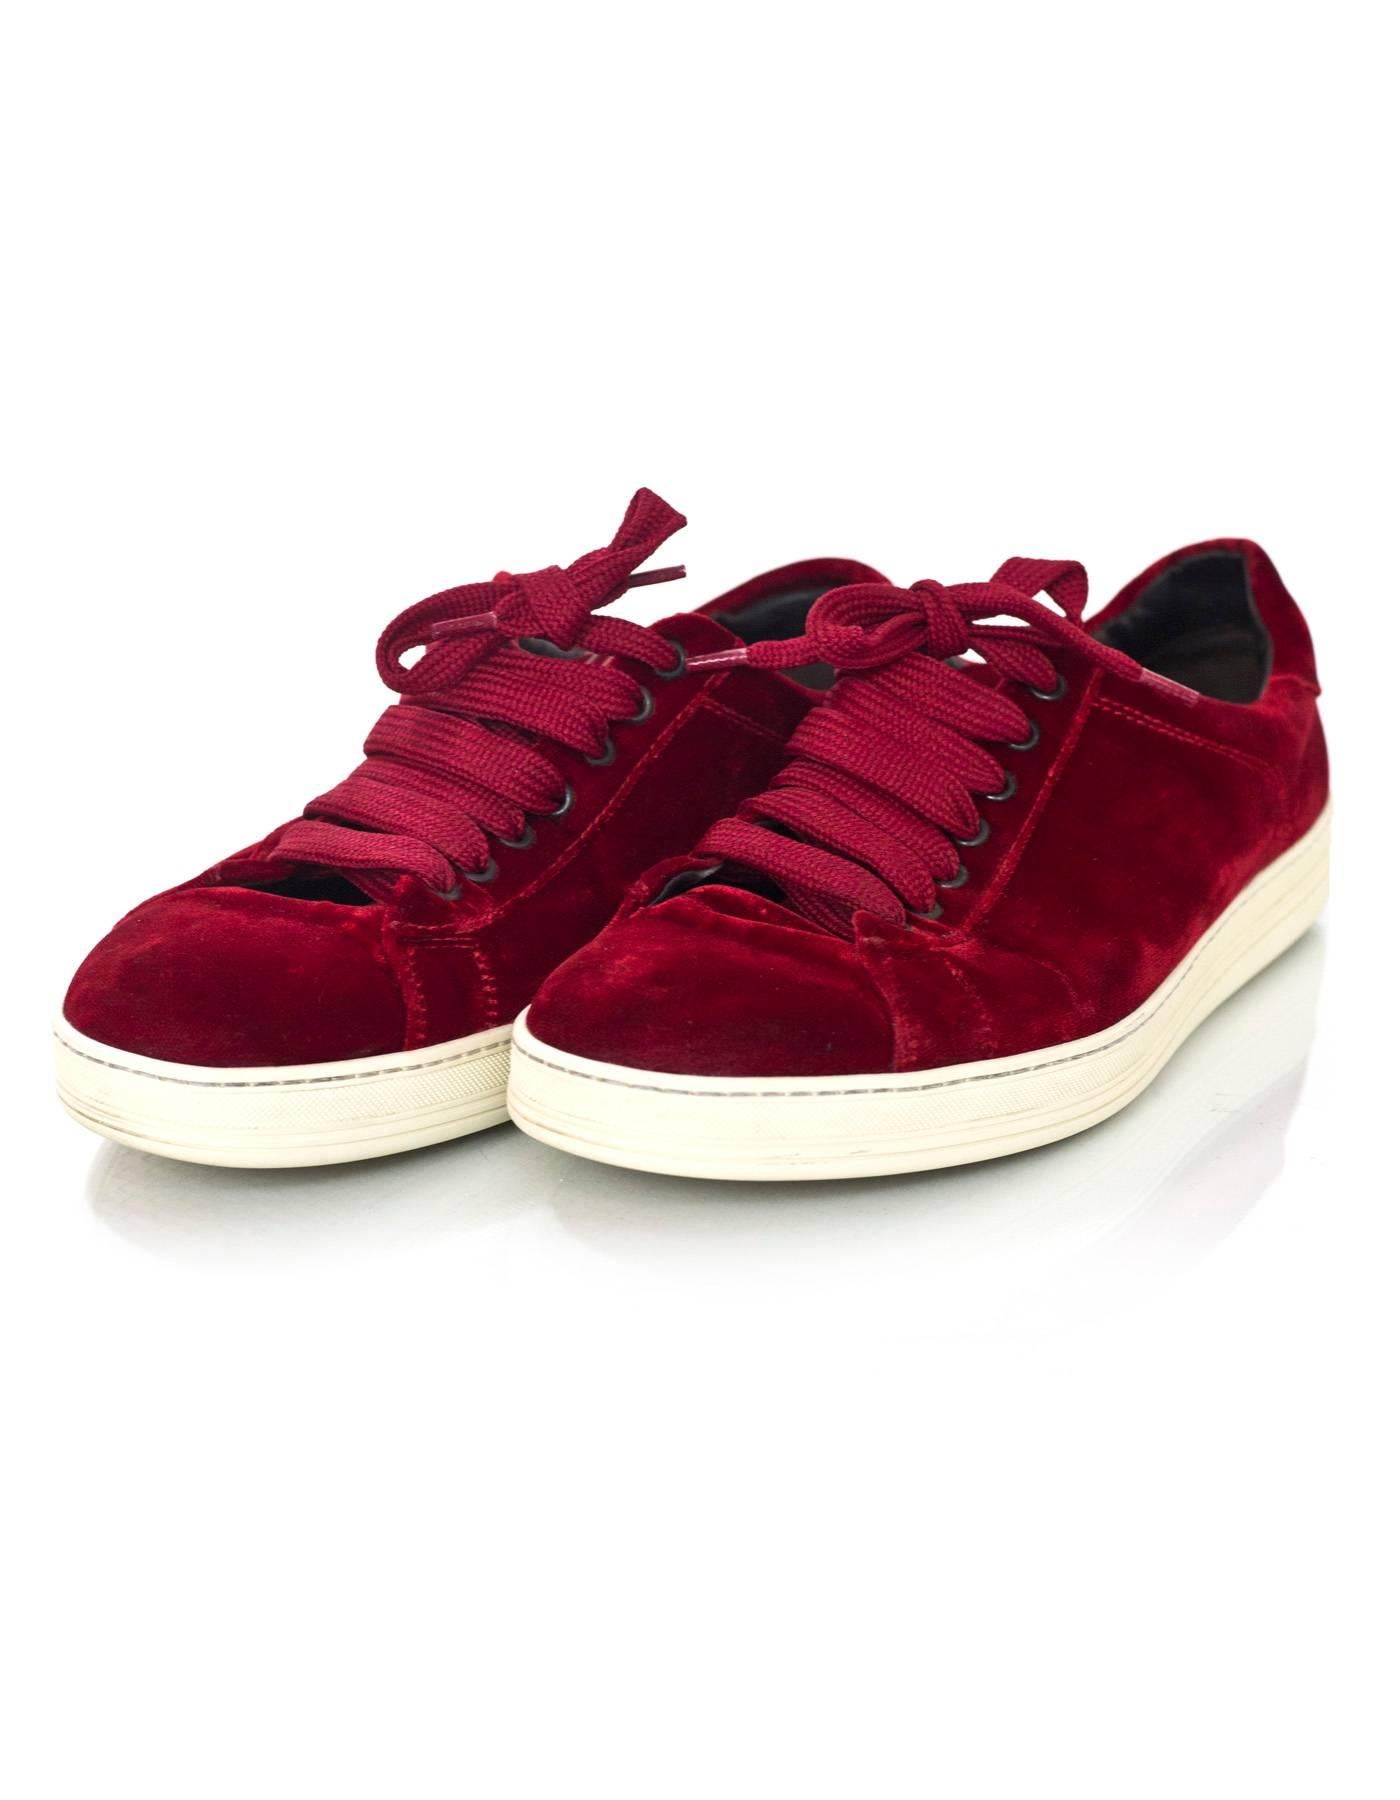 Tom Ford Men's Red Velvet Russell Sneakers Sz 10

Made In: Italy
Color: Red
Materials: Velvet, rubber
Closure: Lace tie
Retail Price: $790 + tax
Overall Condition: Excellent pre-owned condition with the exception of light creasing at velvet, wear at